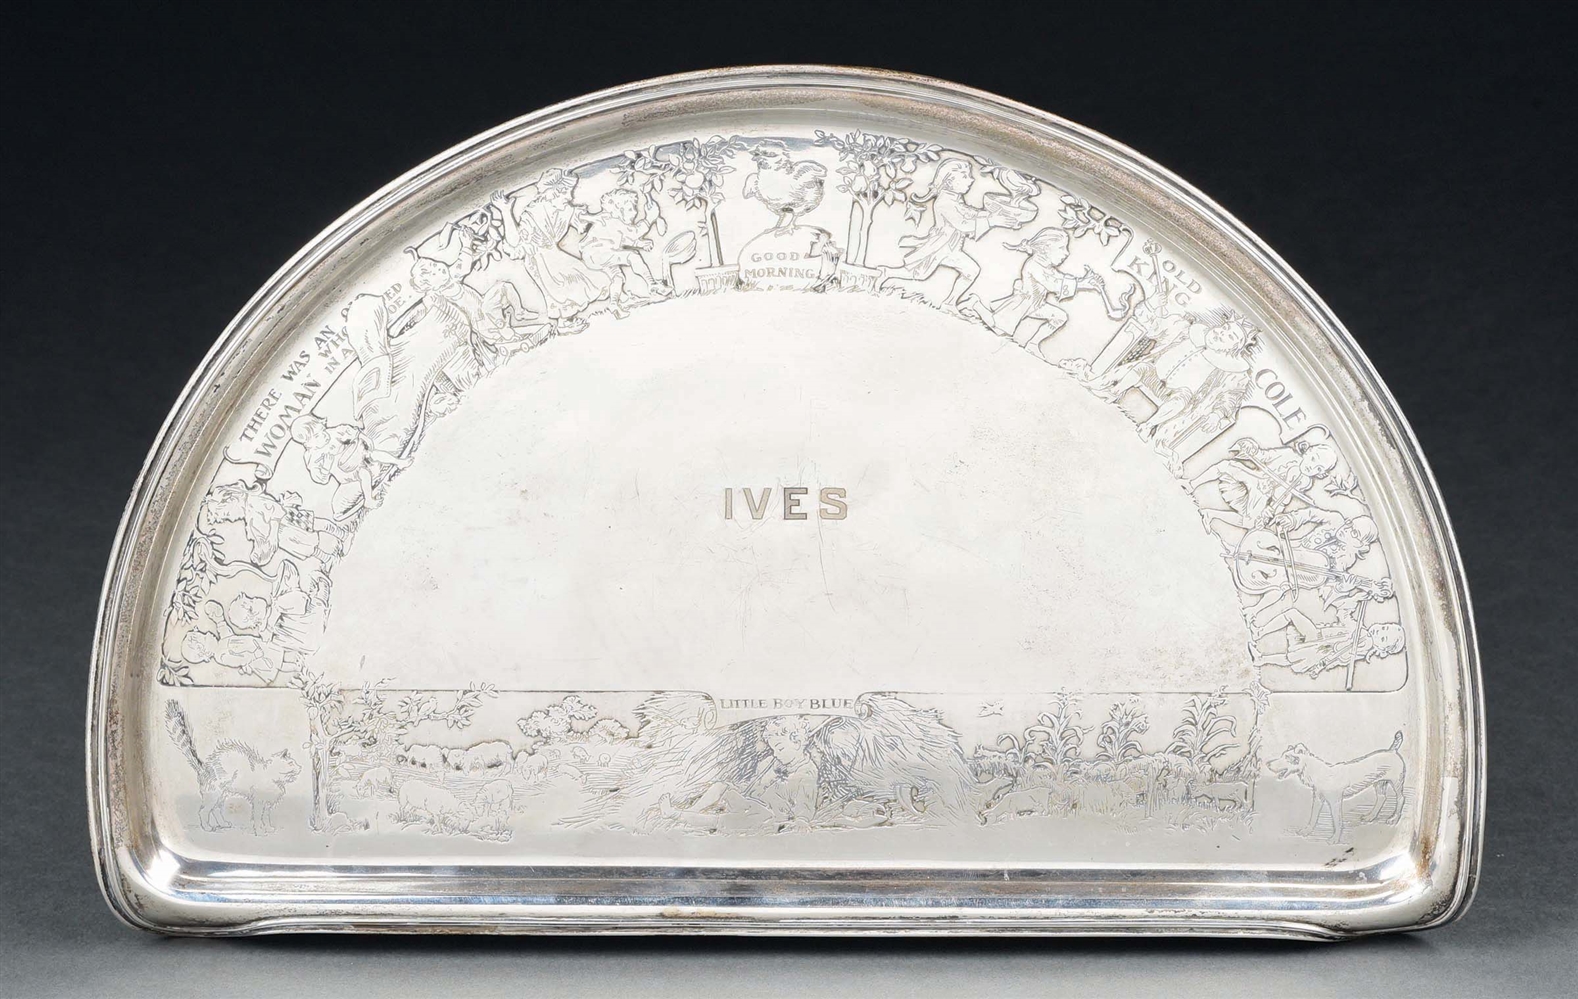 STERLING SILVER EMBOSSED HIGHCHAIR TRAY BELONGING TO IVES MONTGOMERY.